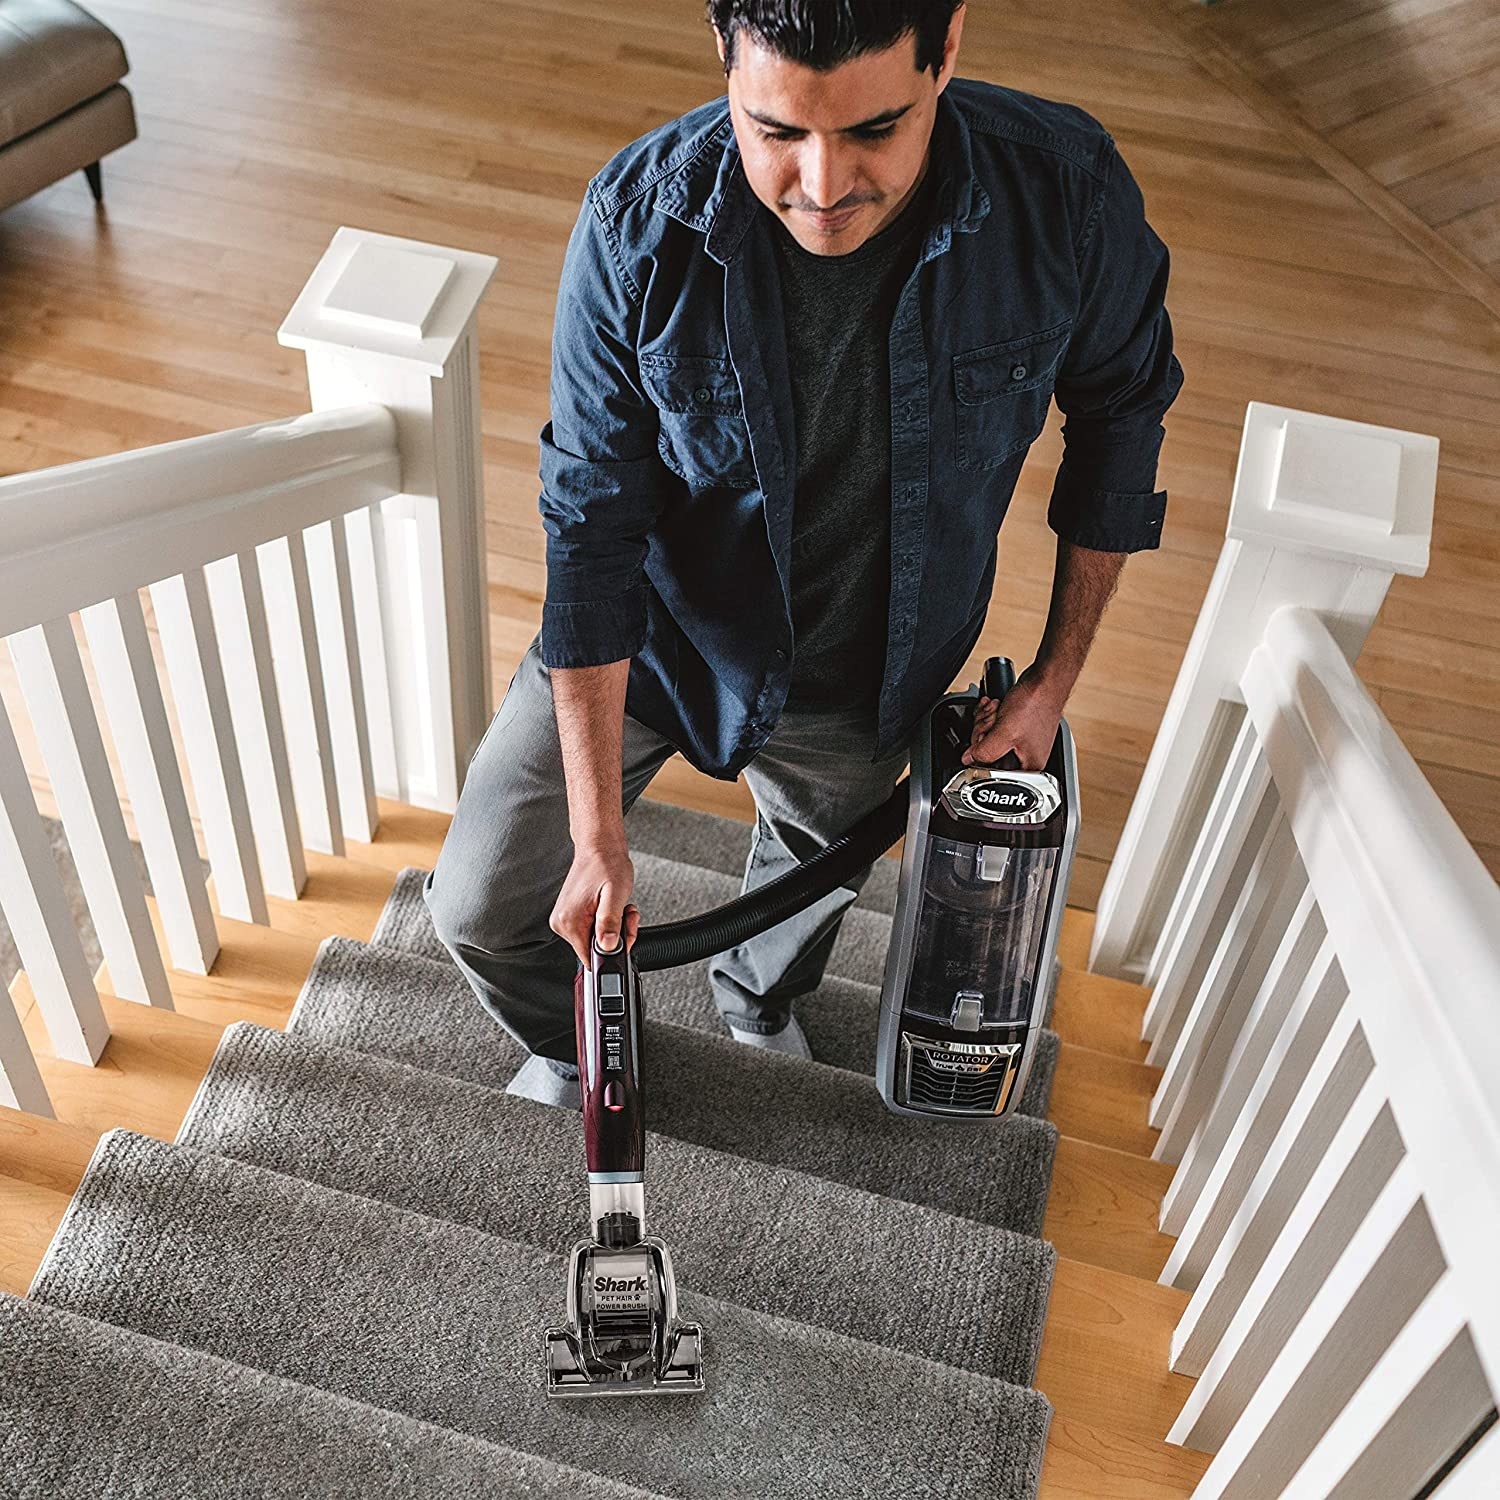 model vacuums stairs while holding the pod in one hand and the brush nozzle in the other